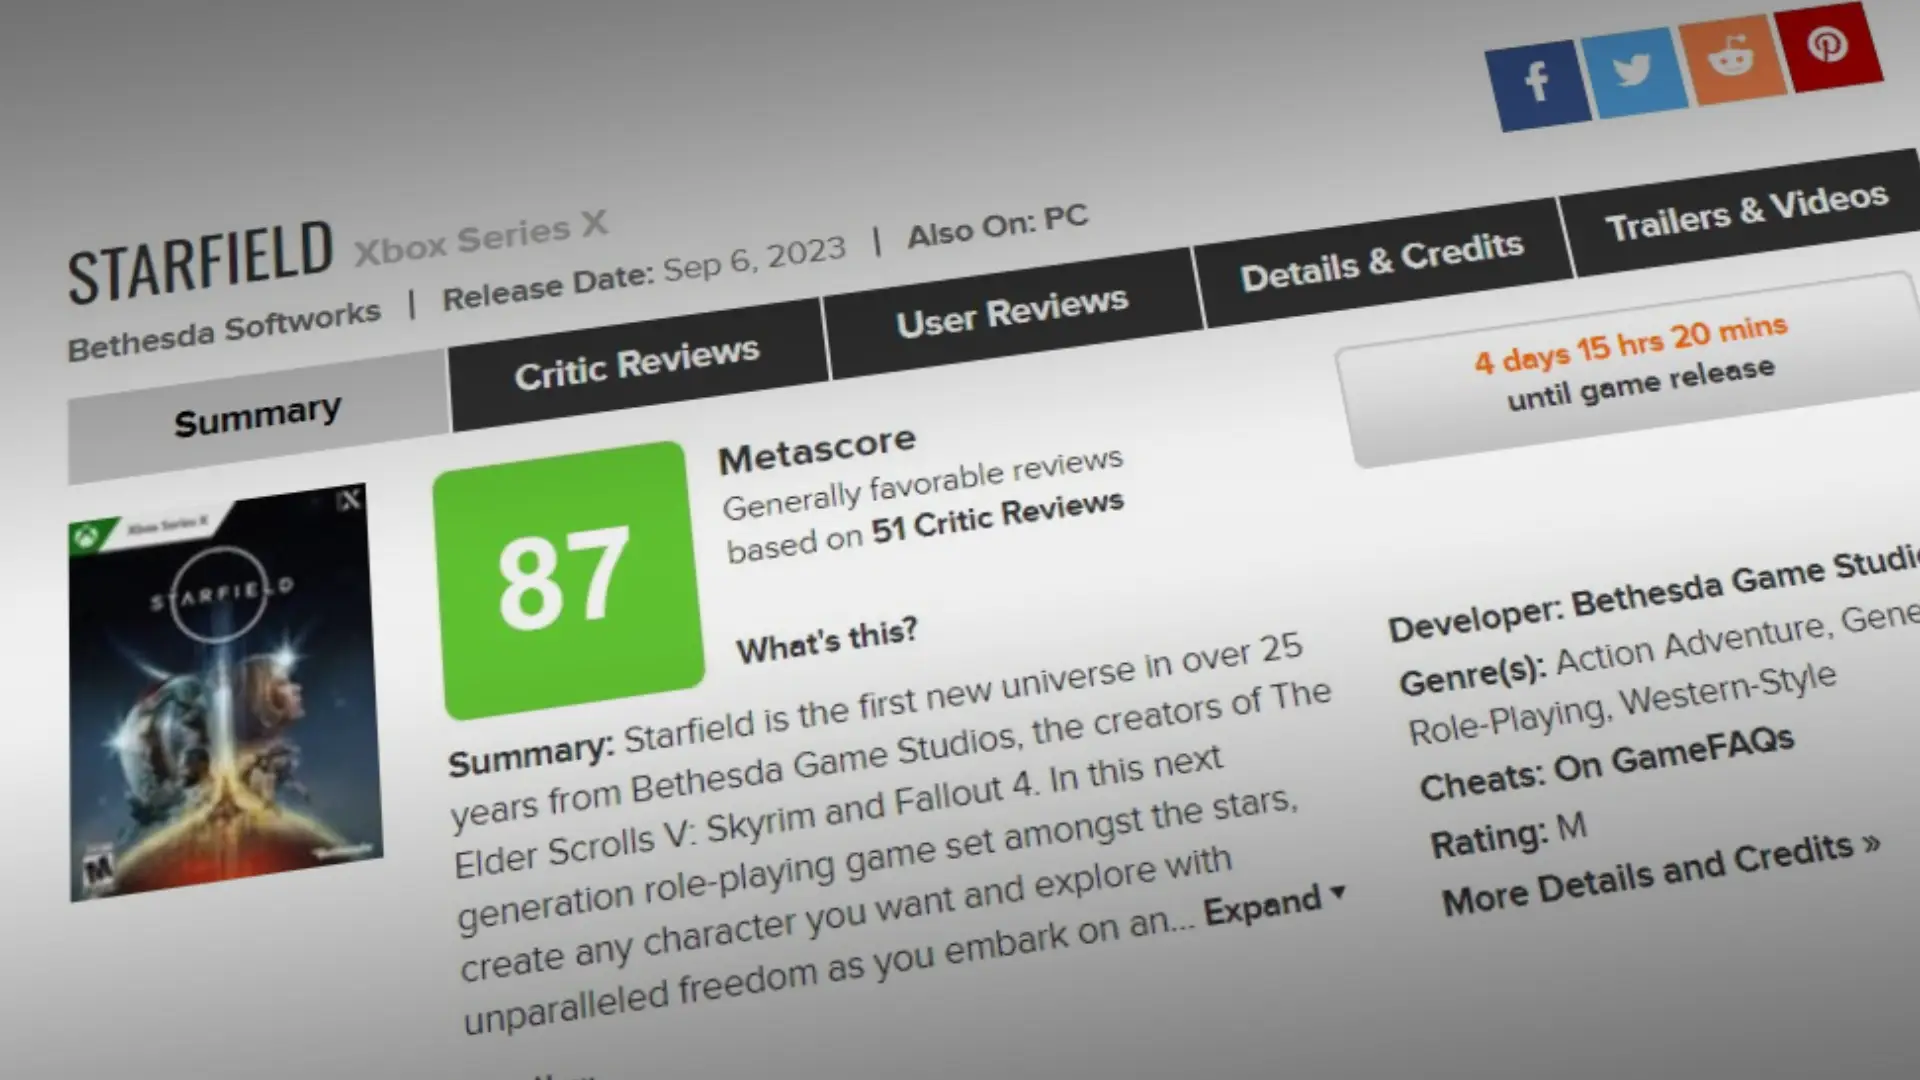 The Starfield Metacritic scores are in, and it's looking very good